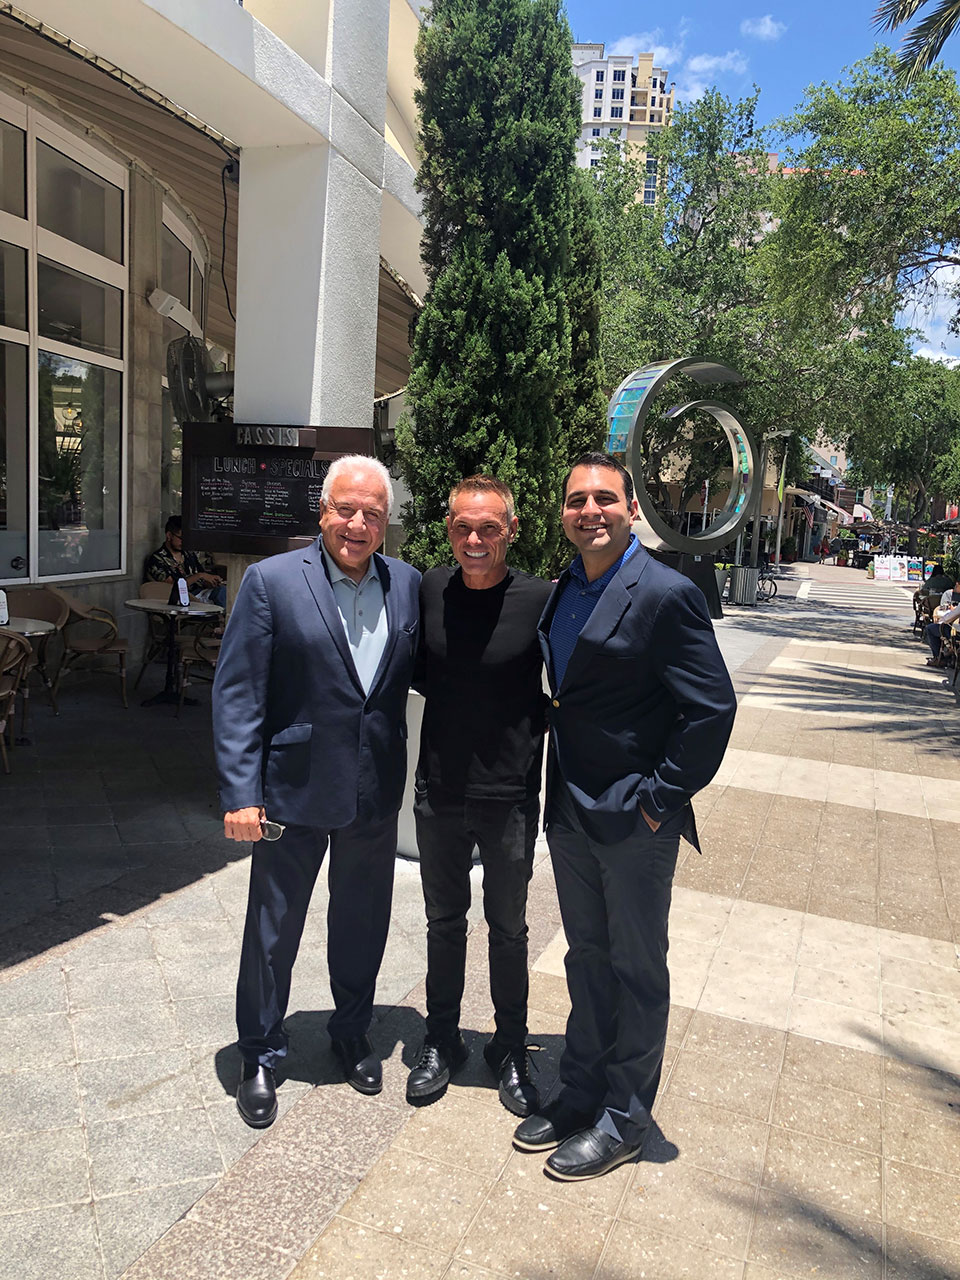 From left to right: Ray Boorojian, Founder, Chairman and CEO, WaveCapital Partners; Kevin Harrington, Owner of Harrington Enterprises; Garrett Boorojian, CDO and Managing Partner, WaveCapital Partners. (St. Petersburg, Florida, 2021).